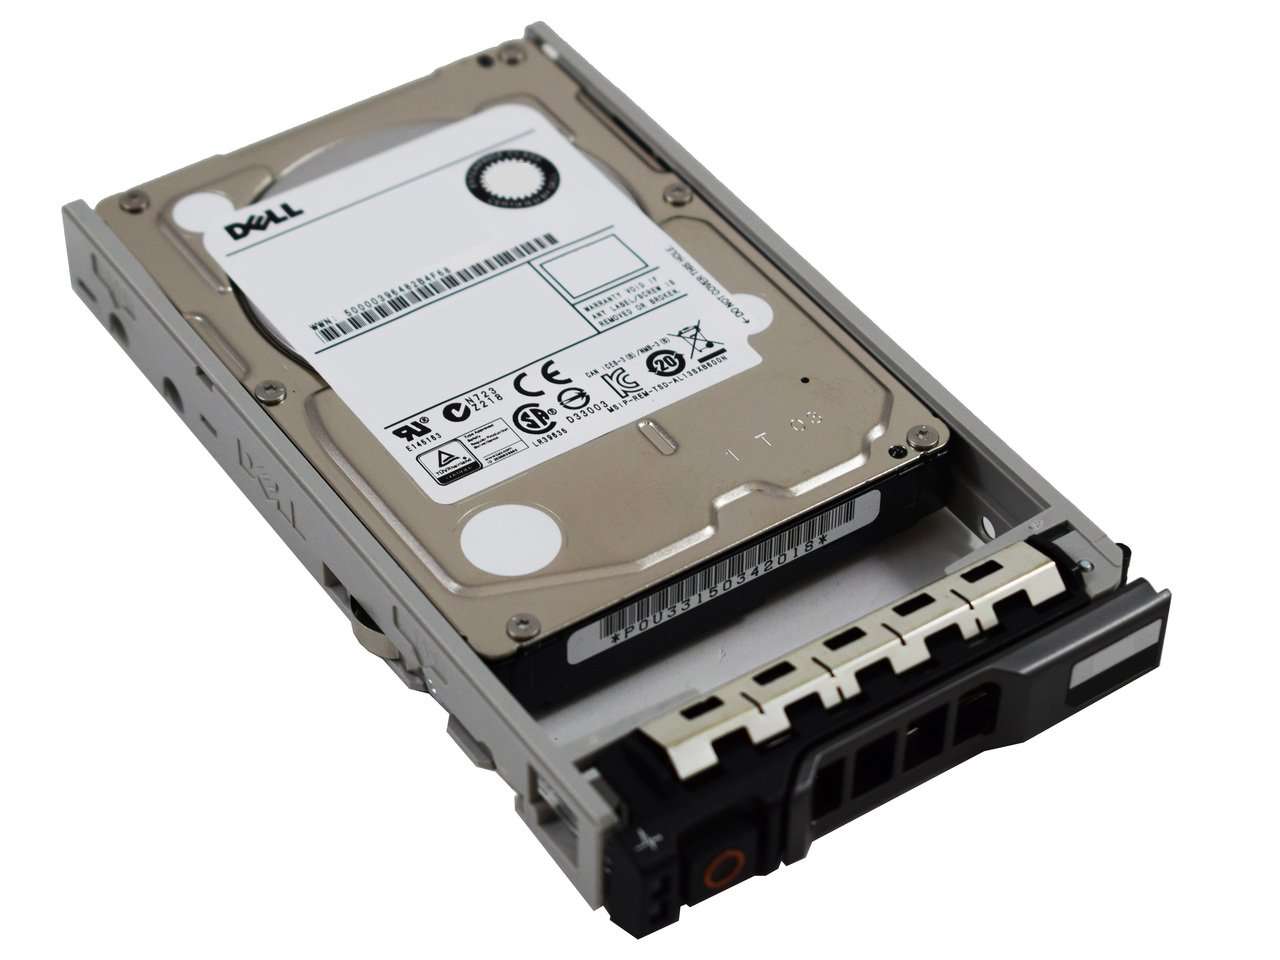 Dell G13 033DP0 600GB 15K RPM SAS 6Gb/s 512n 2.5" Manufacturer Recertified HDD